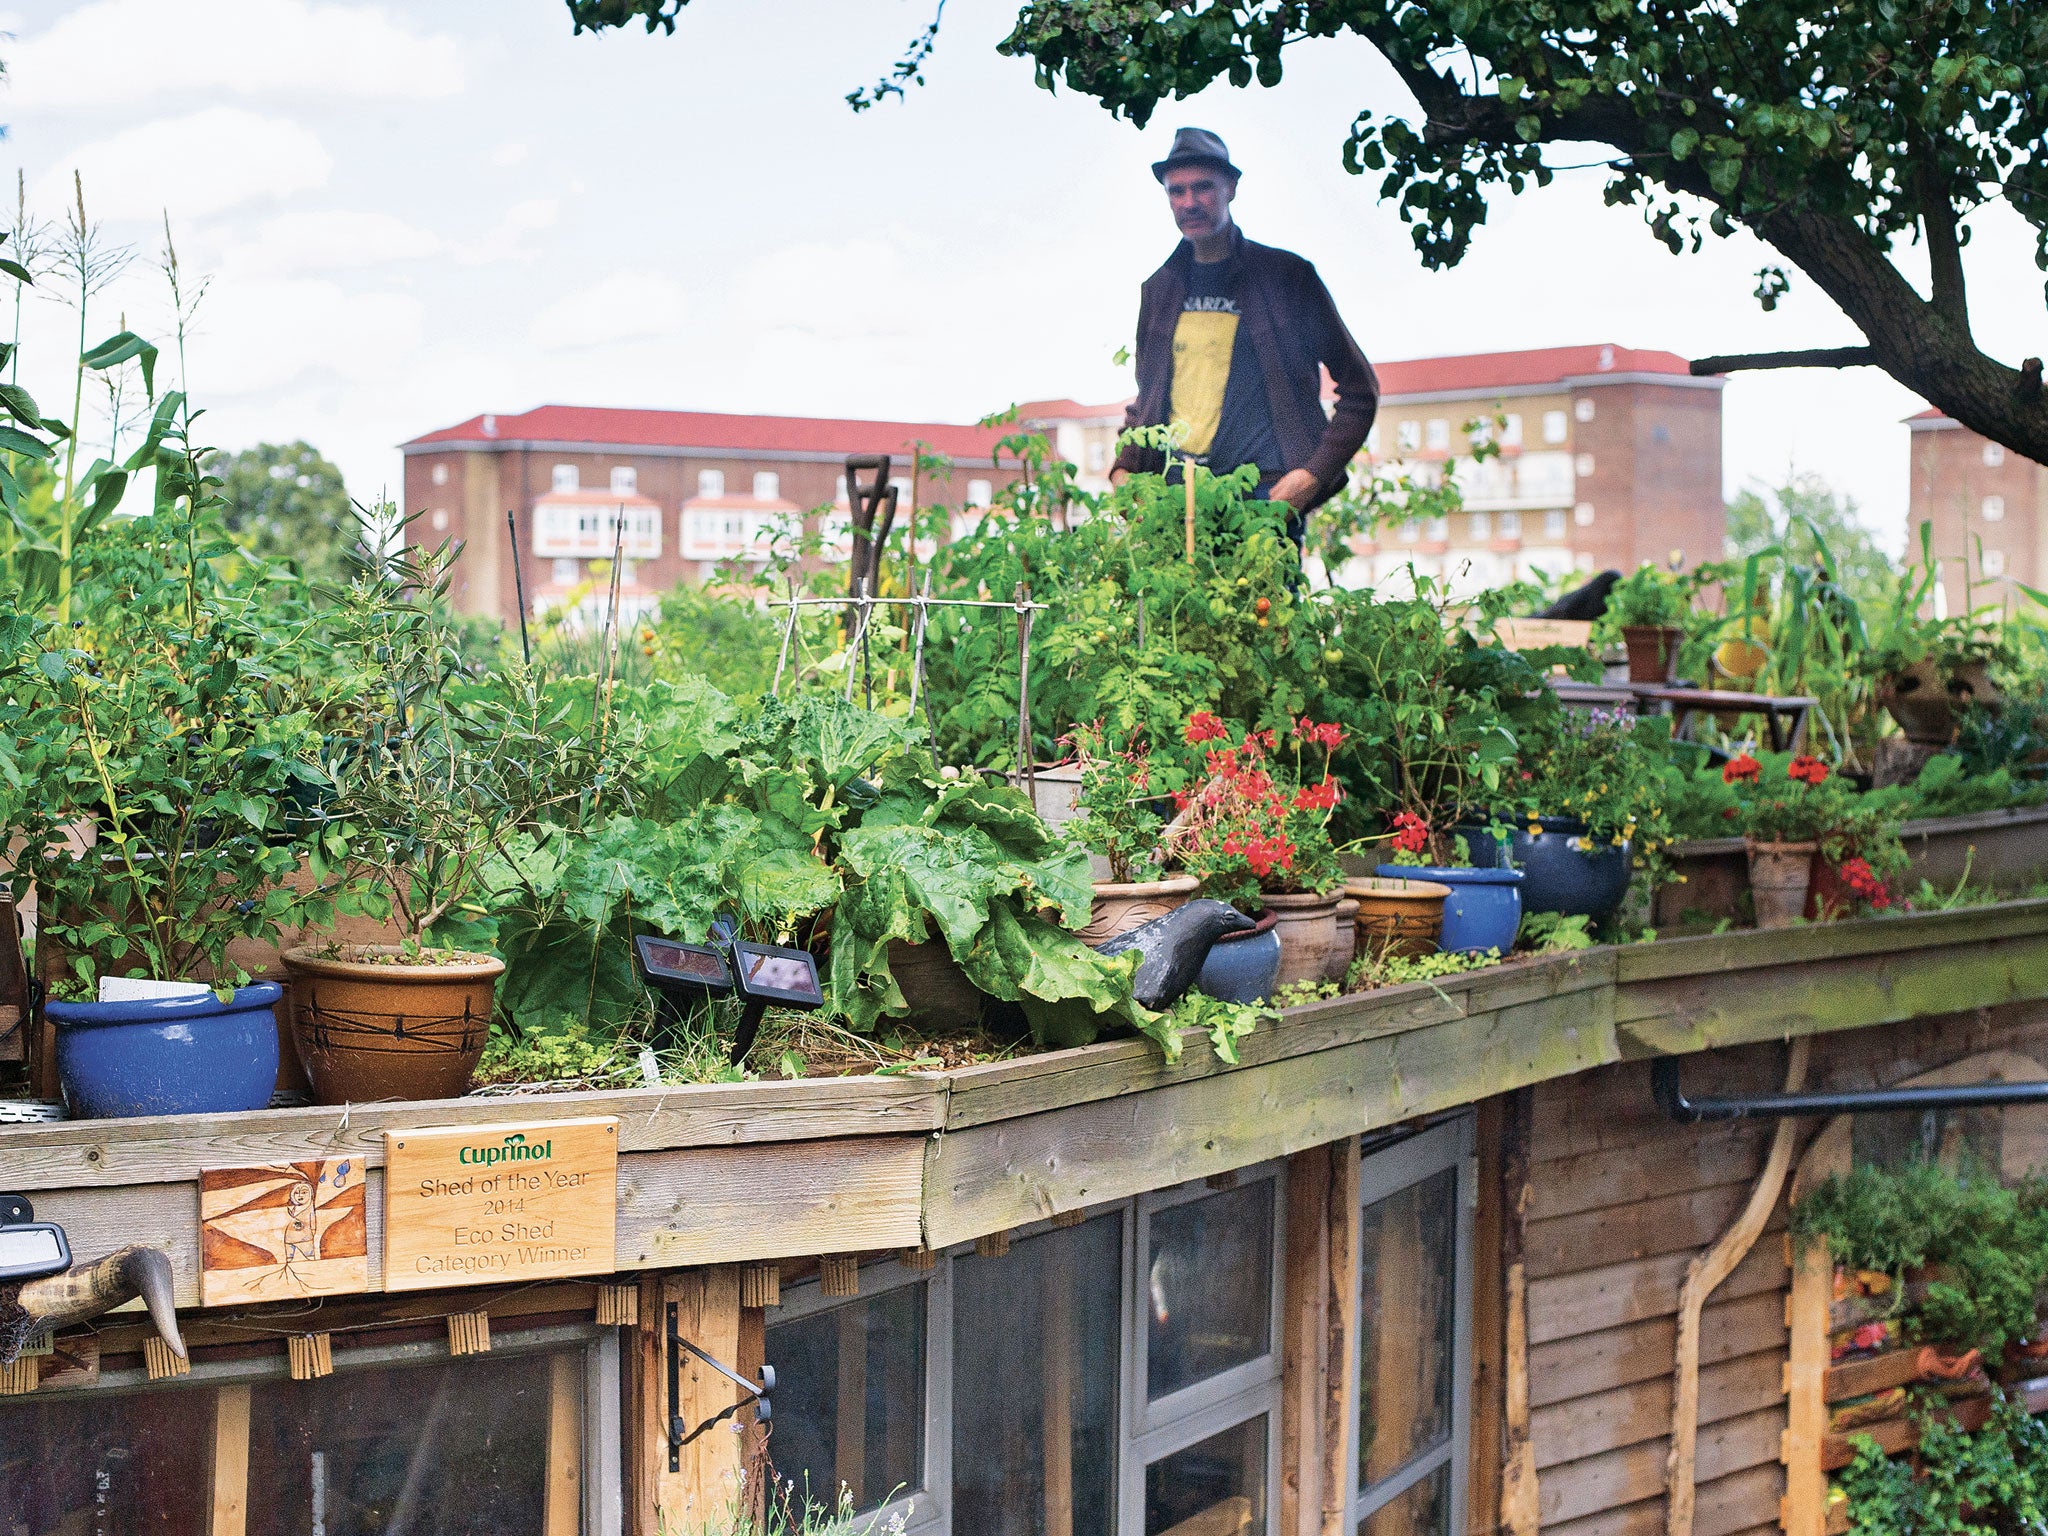 Artist and composer Joel Bird's roof-top allotment, constructed on his self-built art and music studios